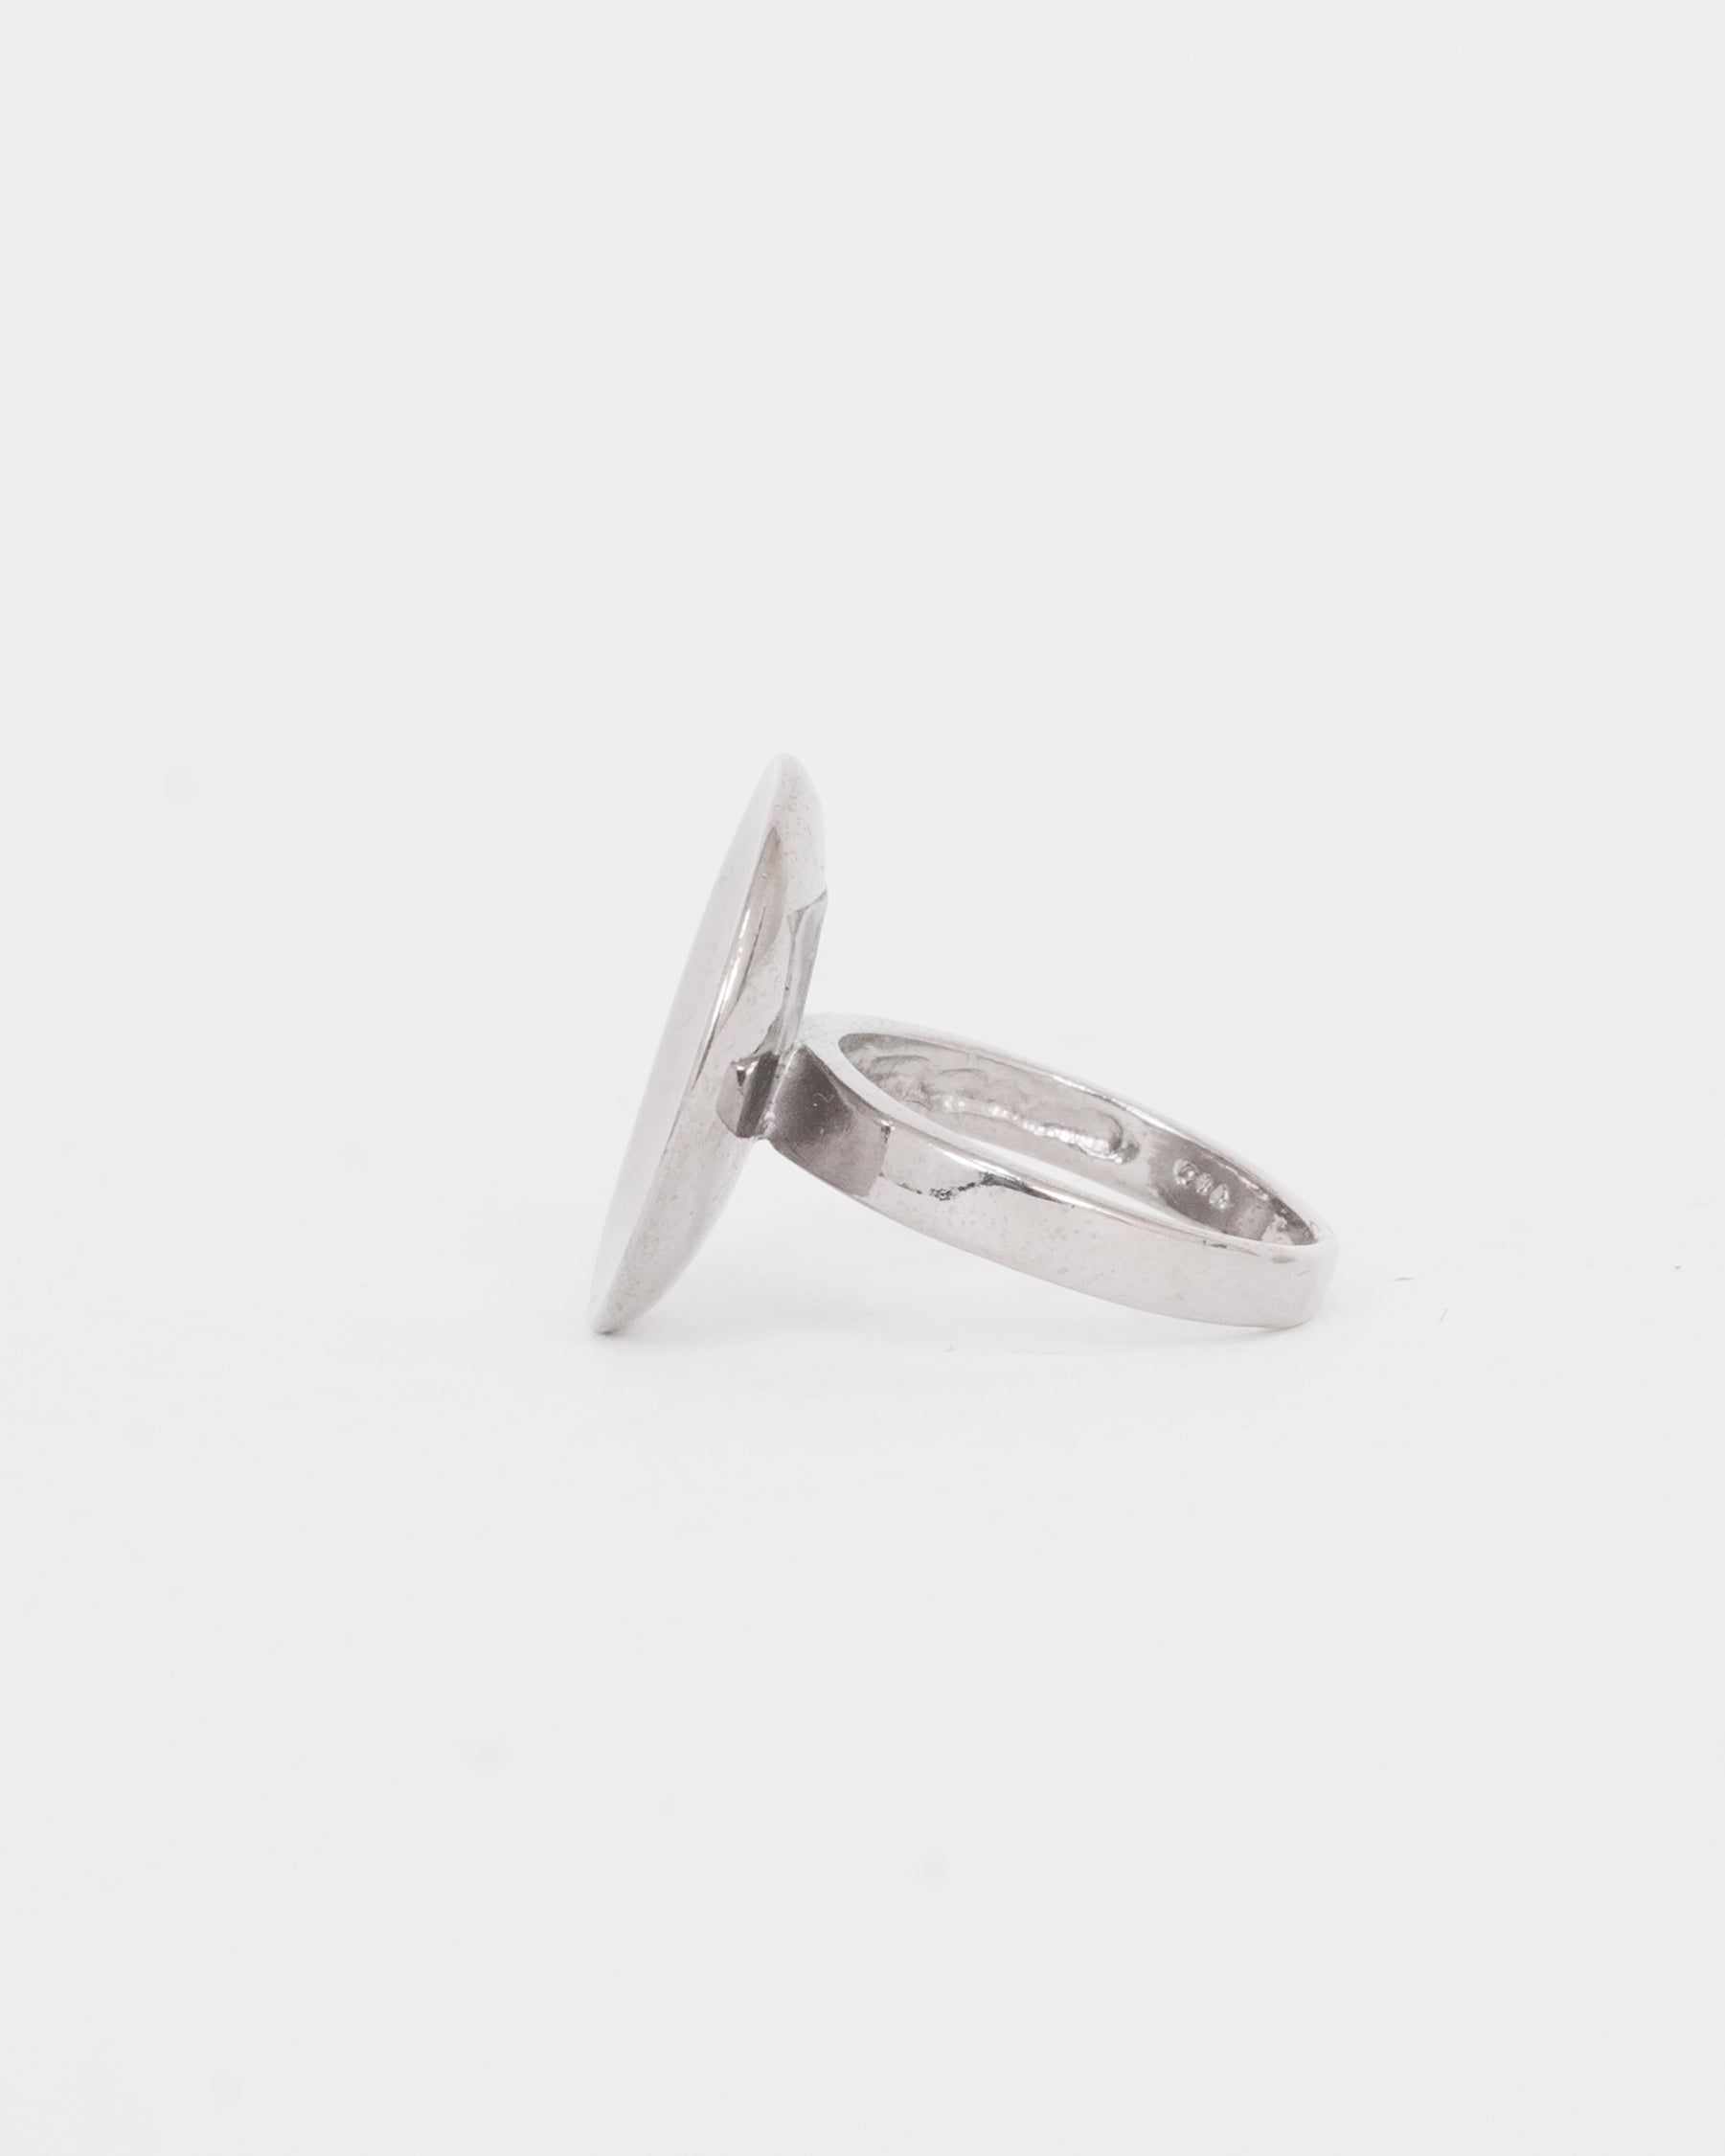 Silver Ring: Size12